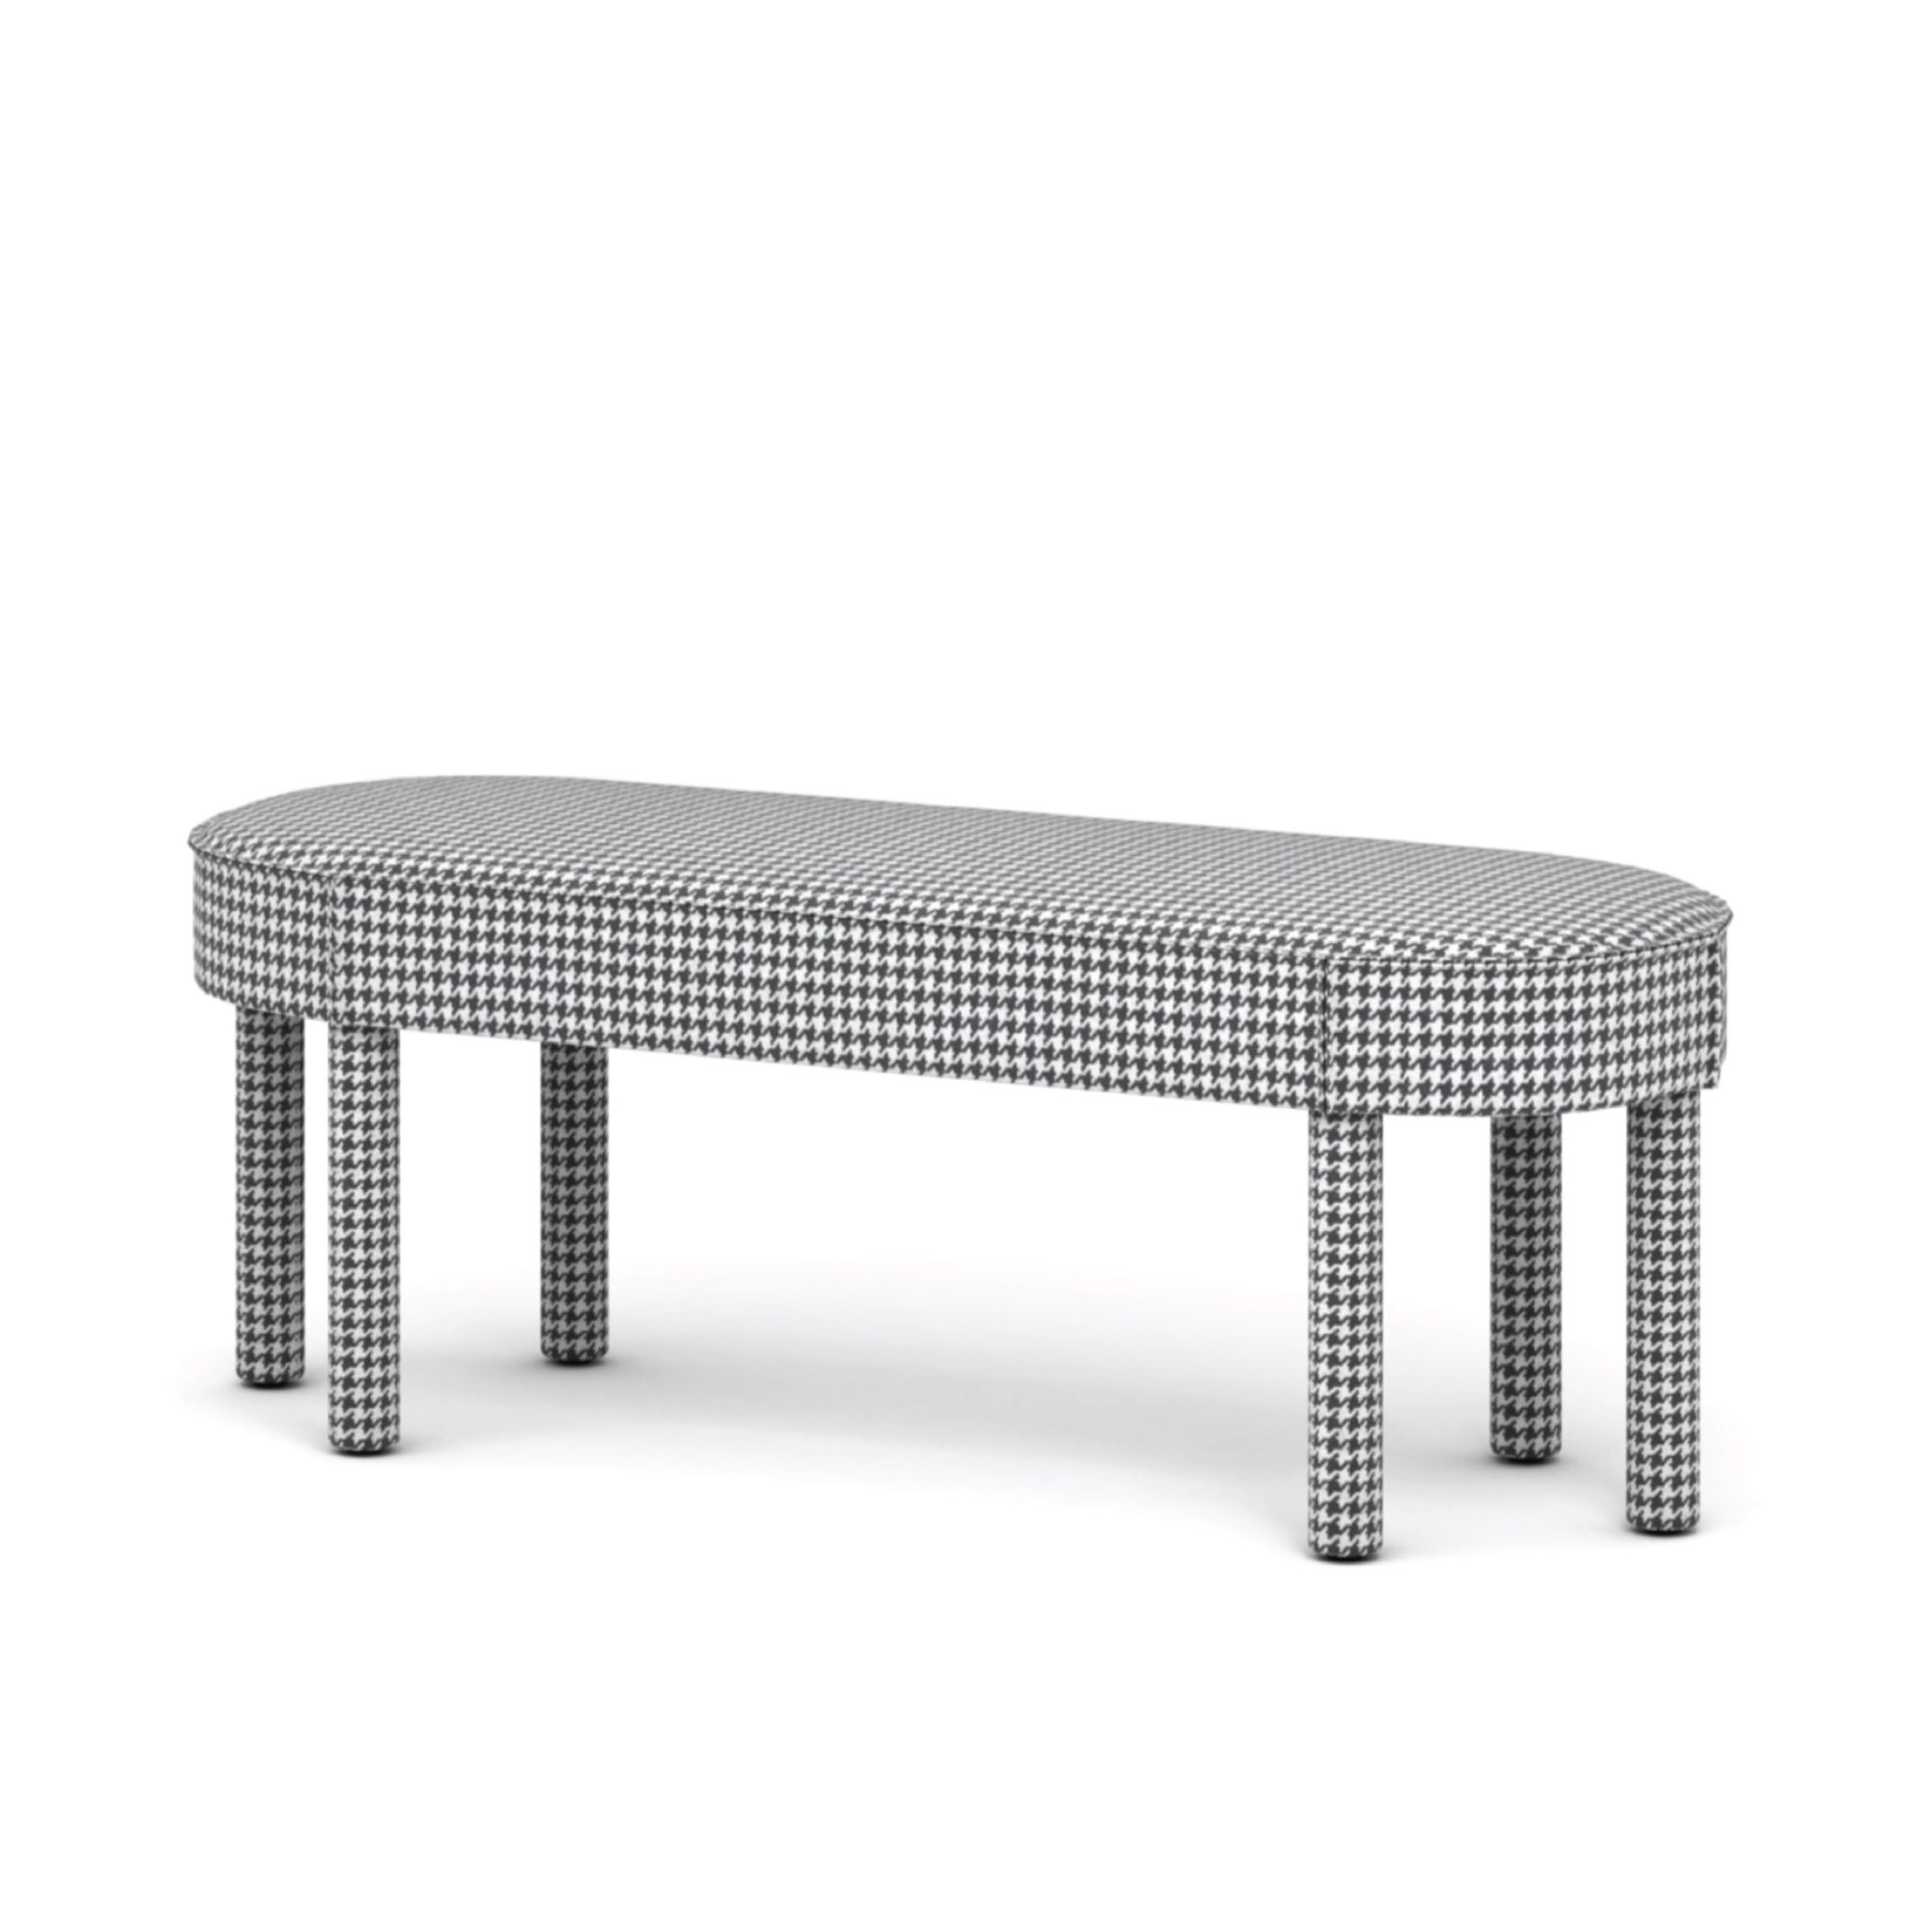 OT03 Bench from ¥1,799